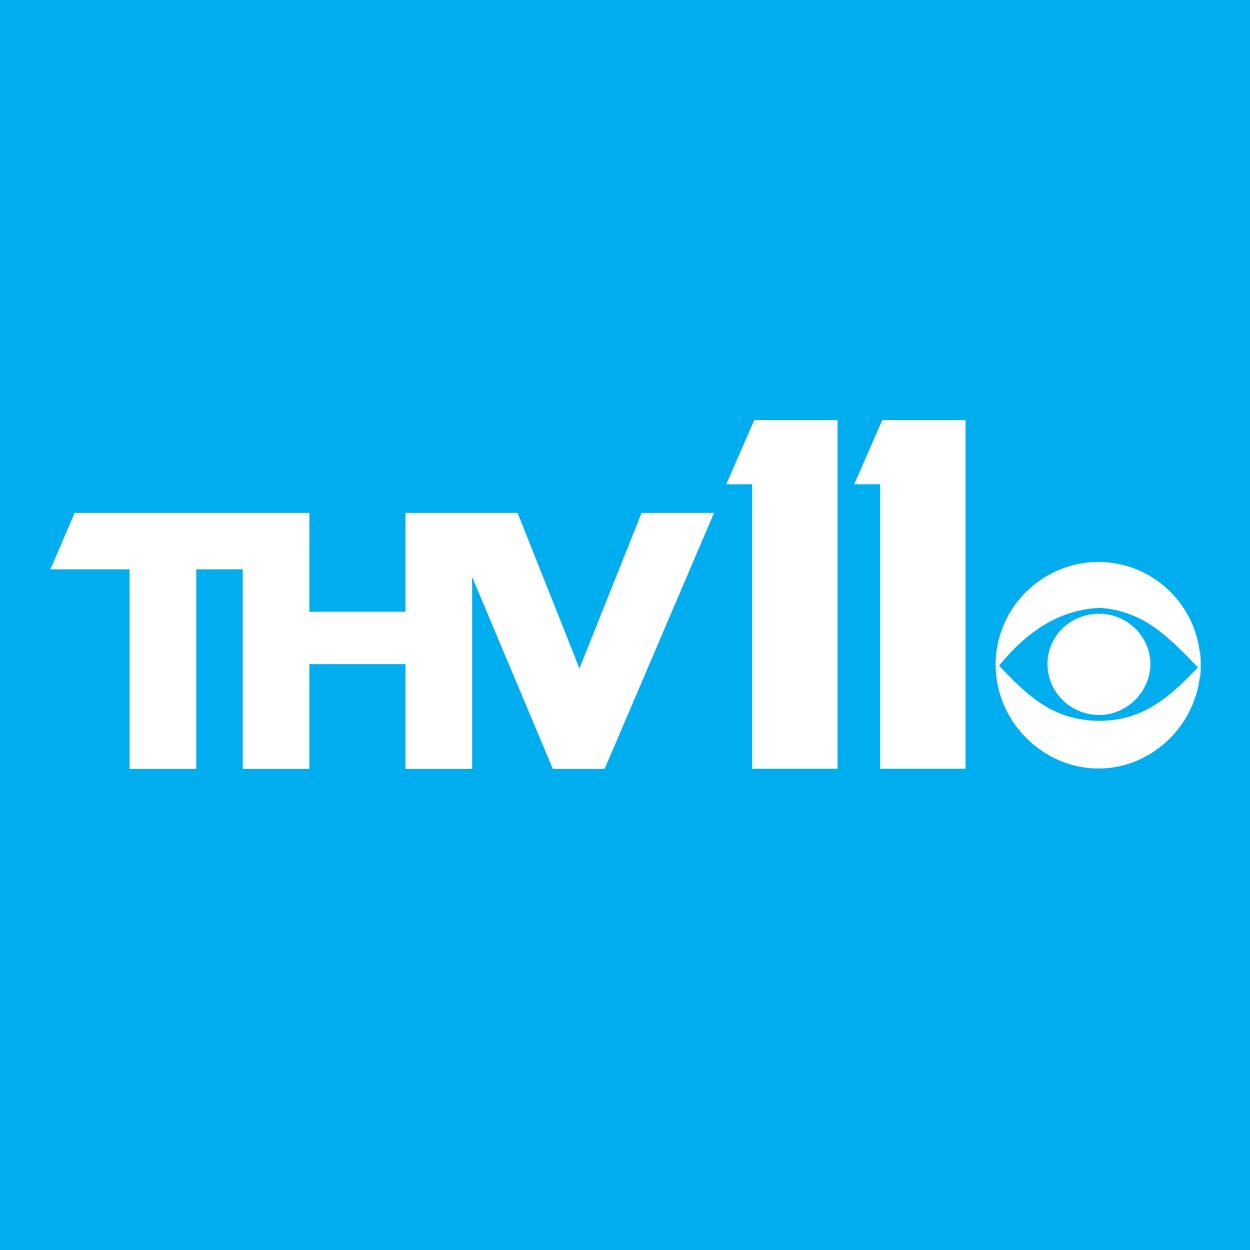 THV 11 logo with sky blue background and white lettering along with CBS eye logo